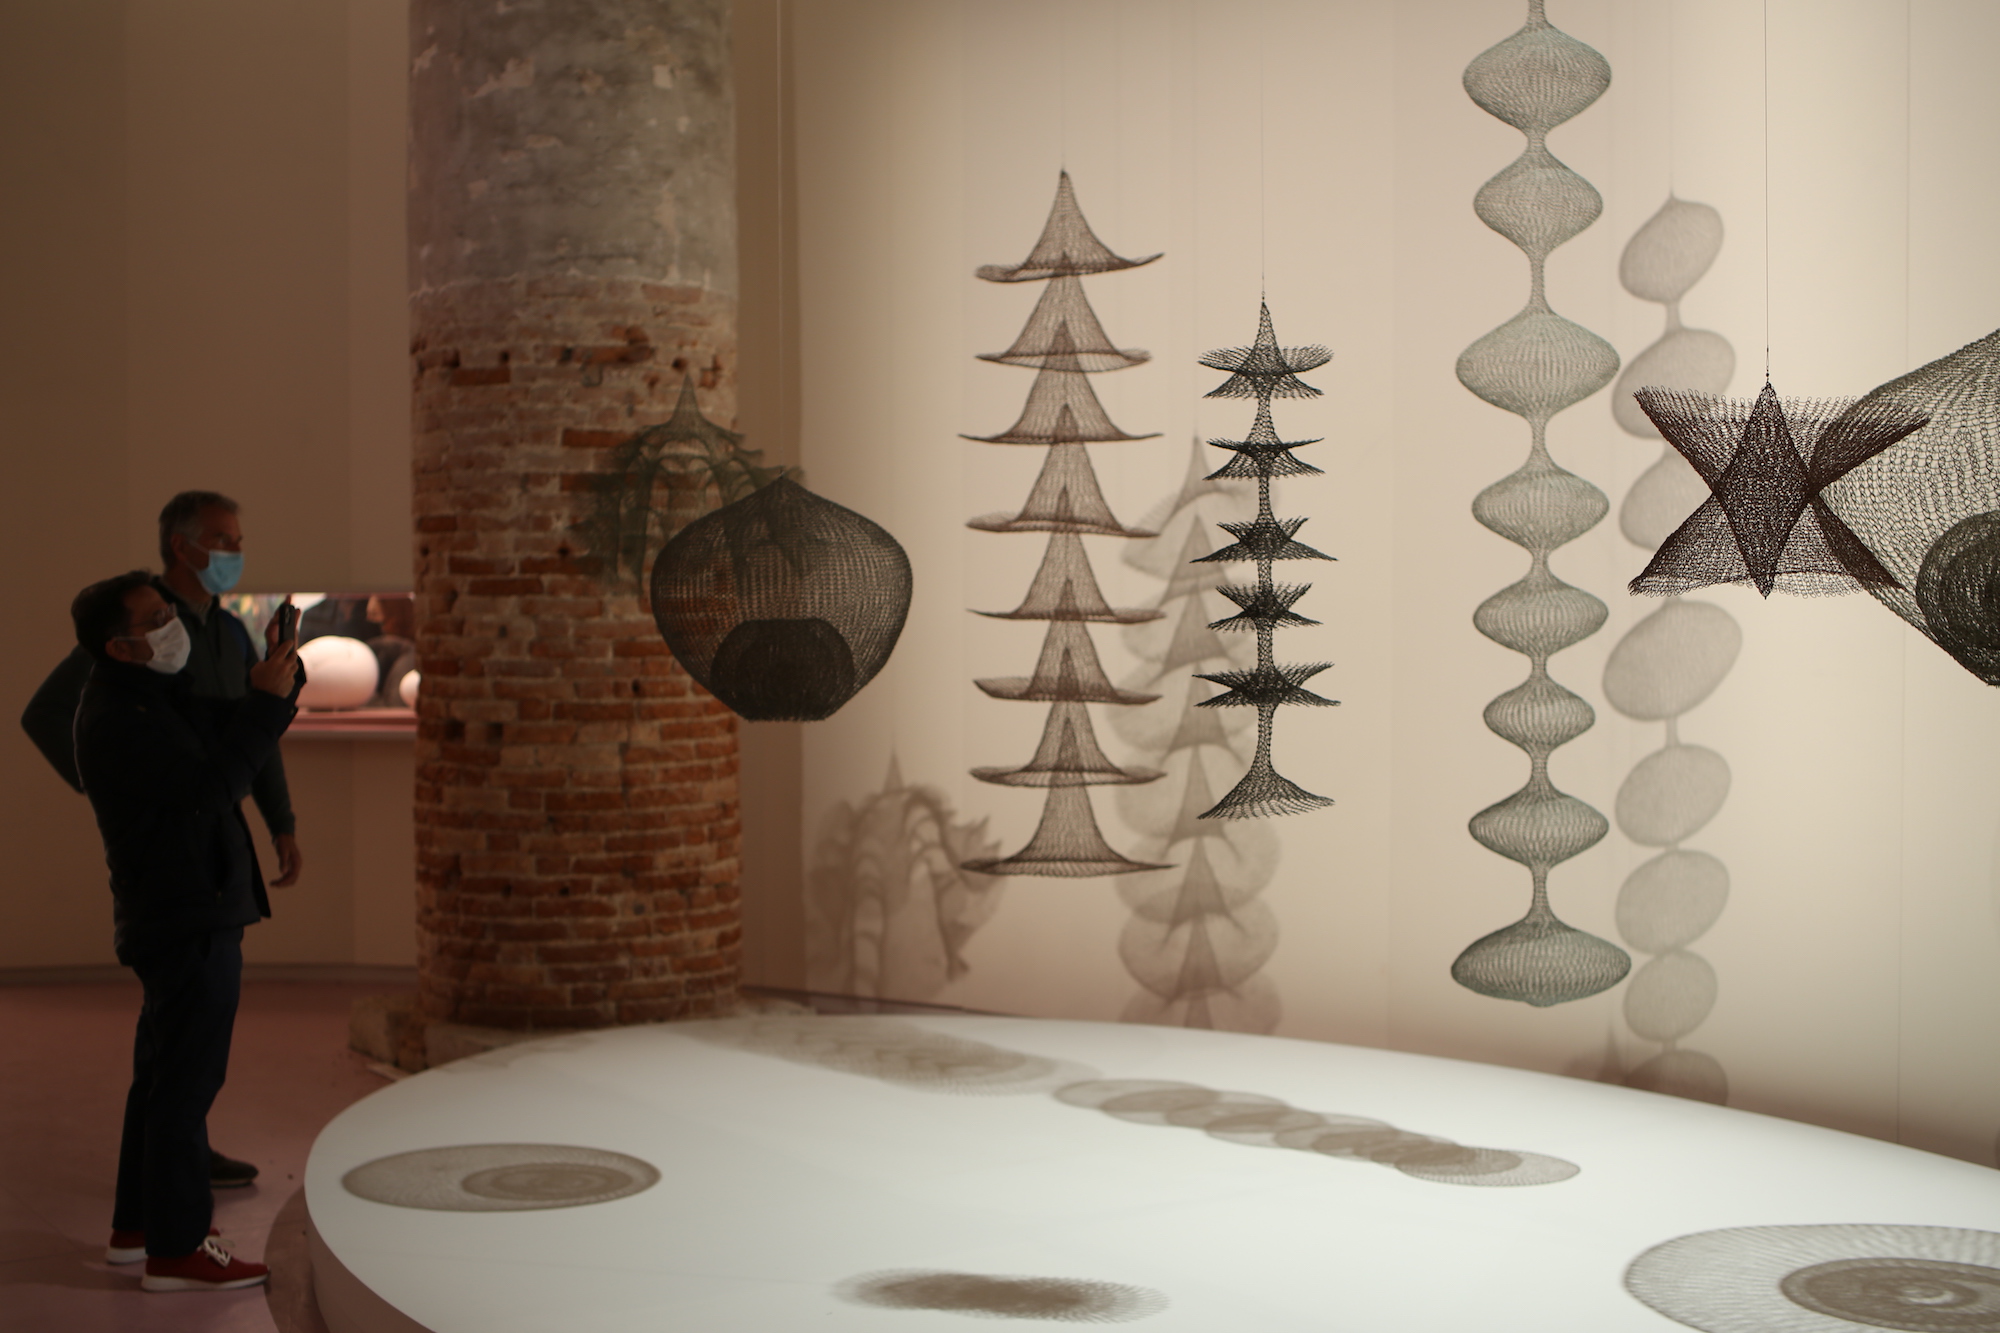 Works by Ruth Asawa at the Venice Biennale. Photo by Louise Benson